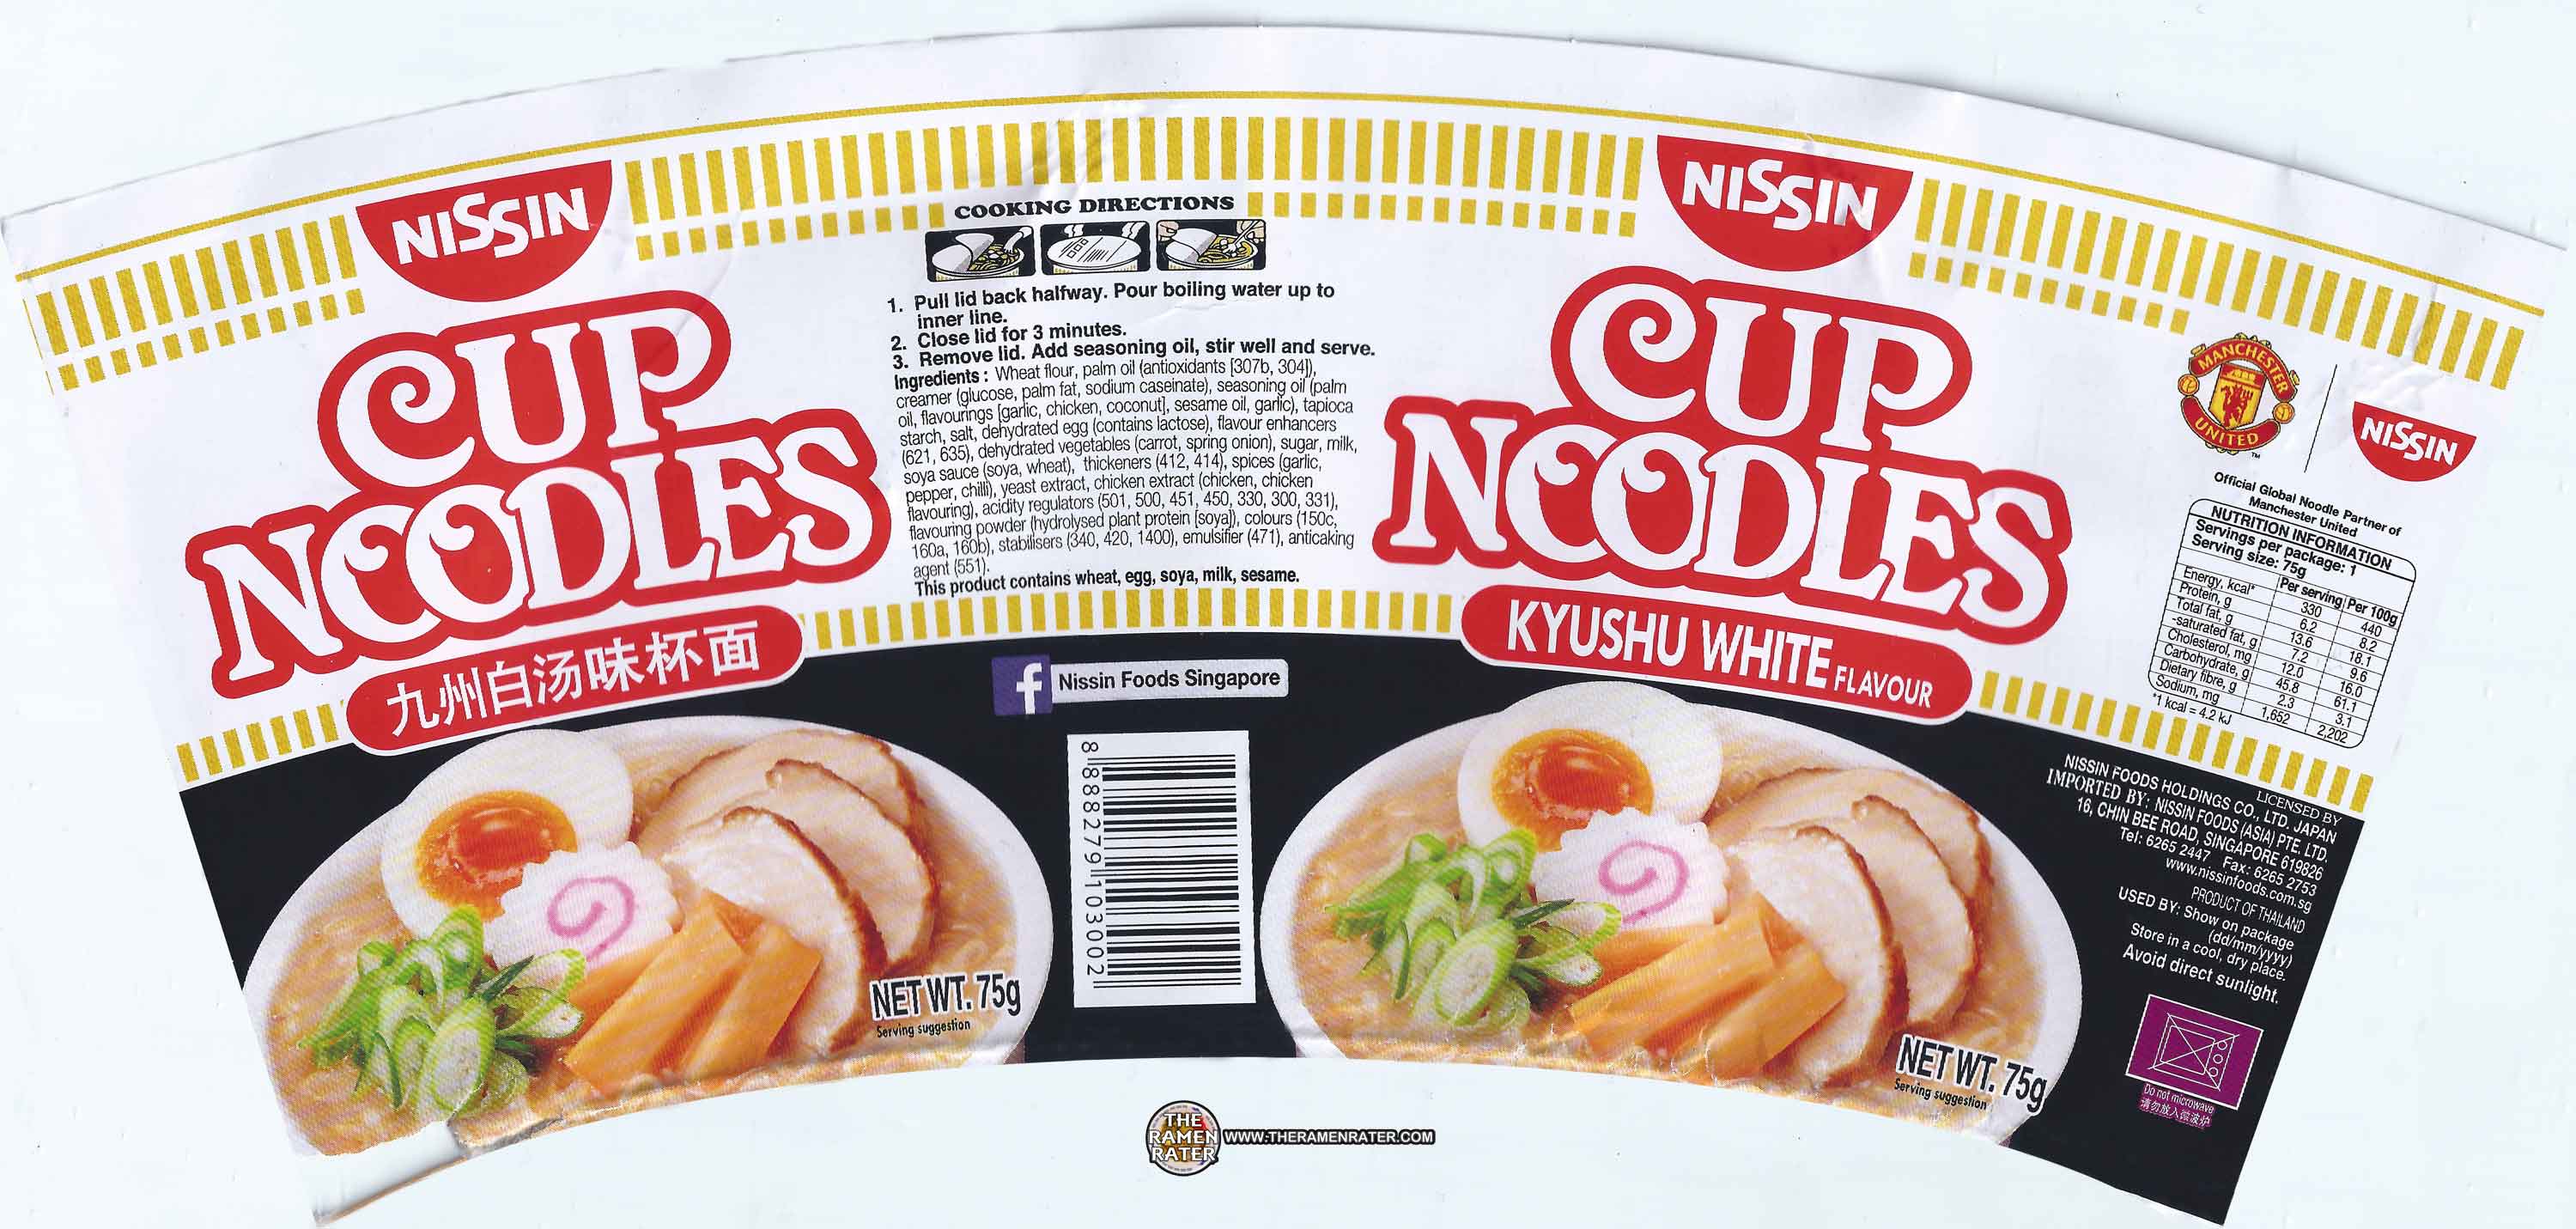 #1888: Nissin Cup Noodles Kyushu White Flavour - THE RAMEN RATER